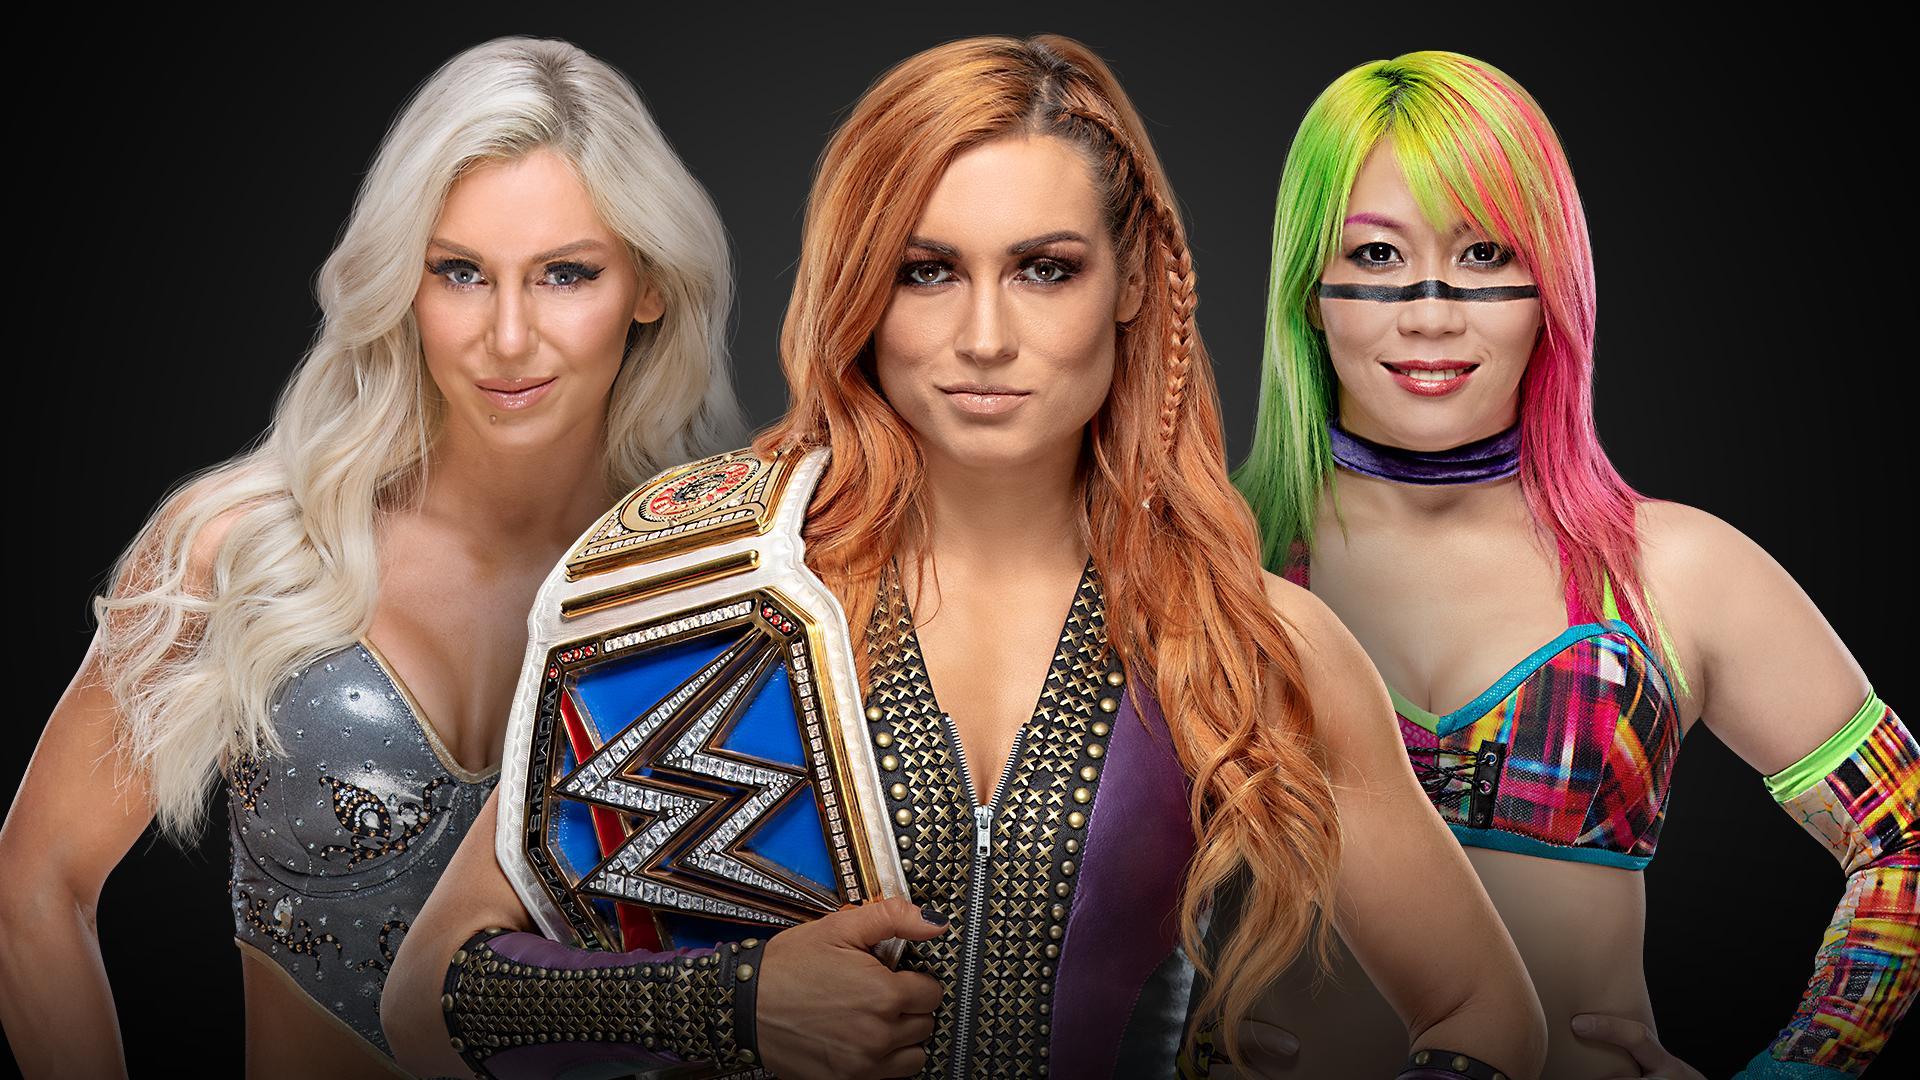 Why Asuka was added to the SD Women's title match at WWE TLC